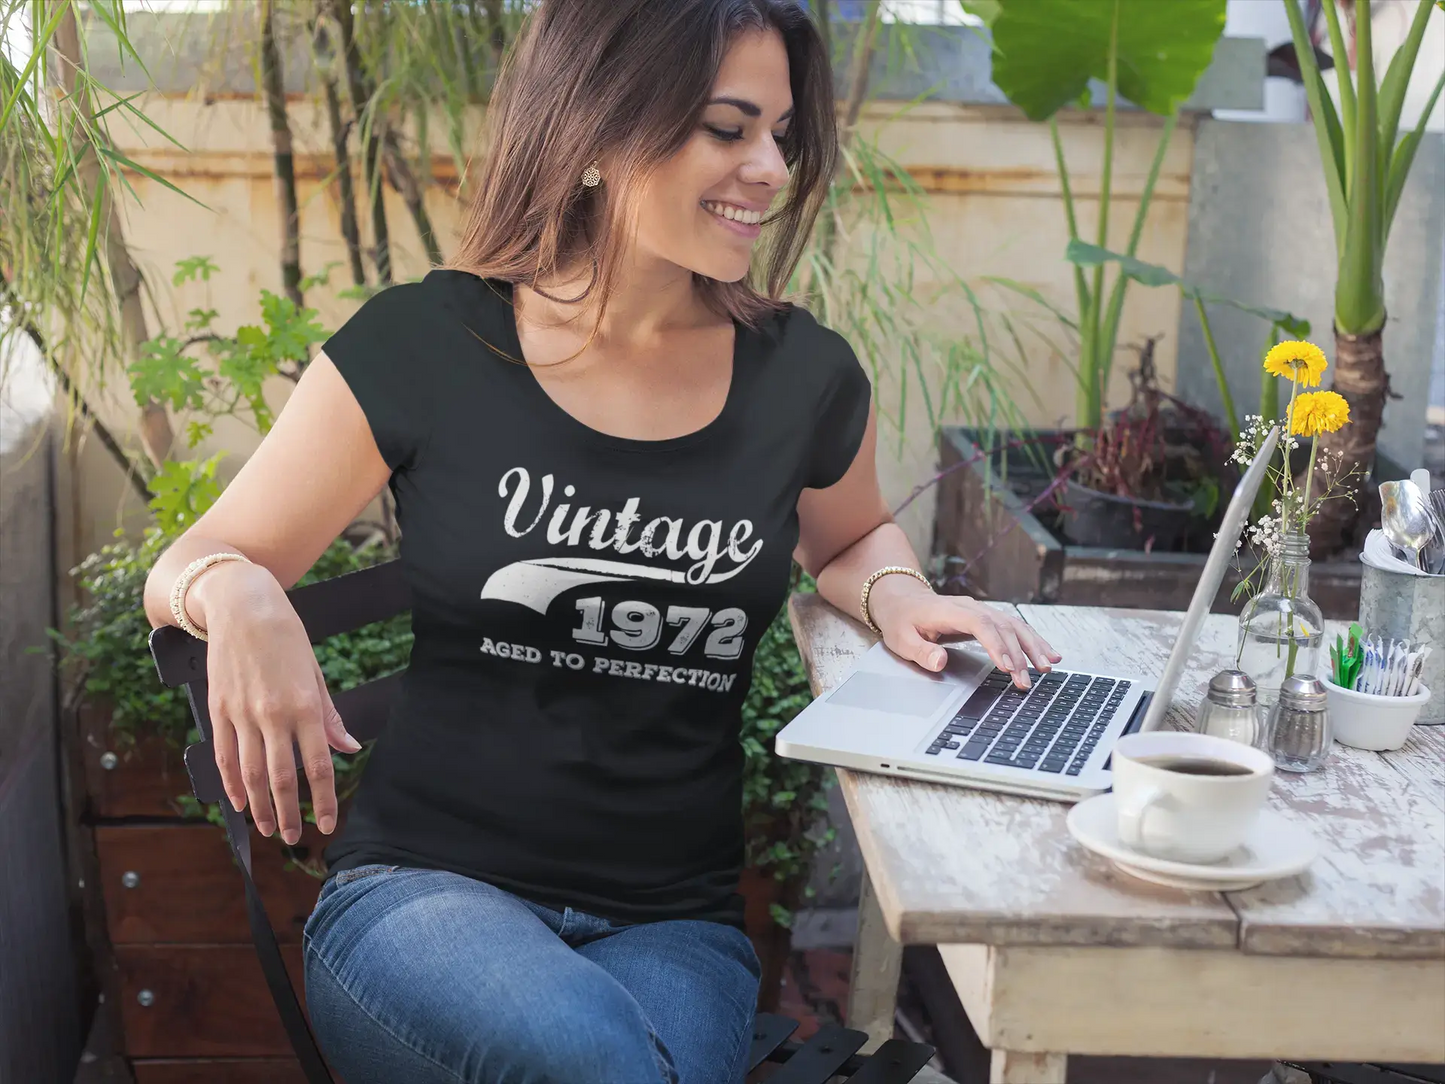 Vintage Aged to Perfection 1972, Black, Women's Short Sleeve Round Neck T-shirt, gift t-shirt 00345